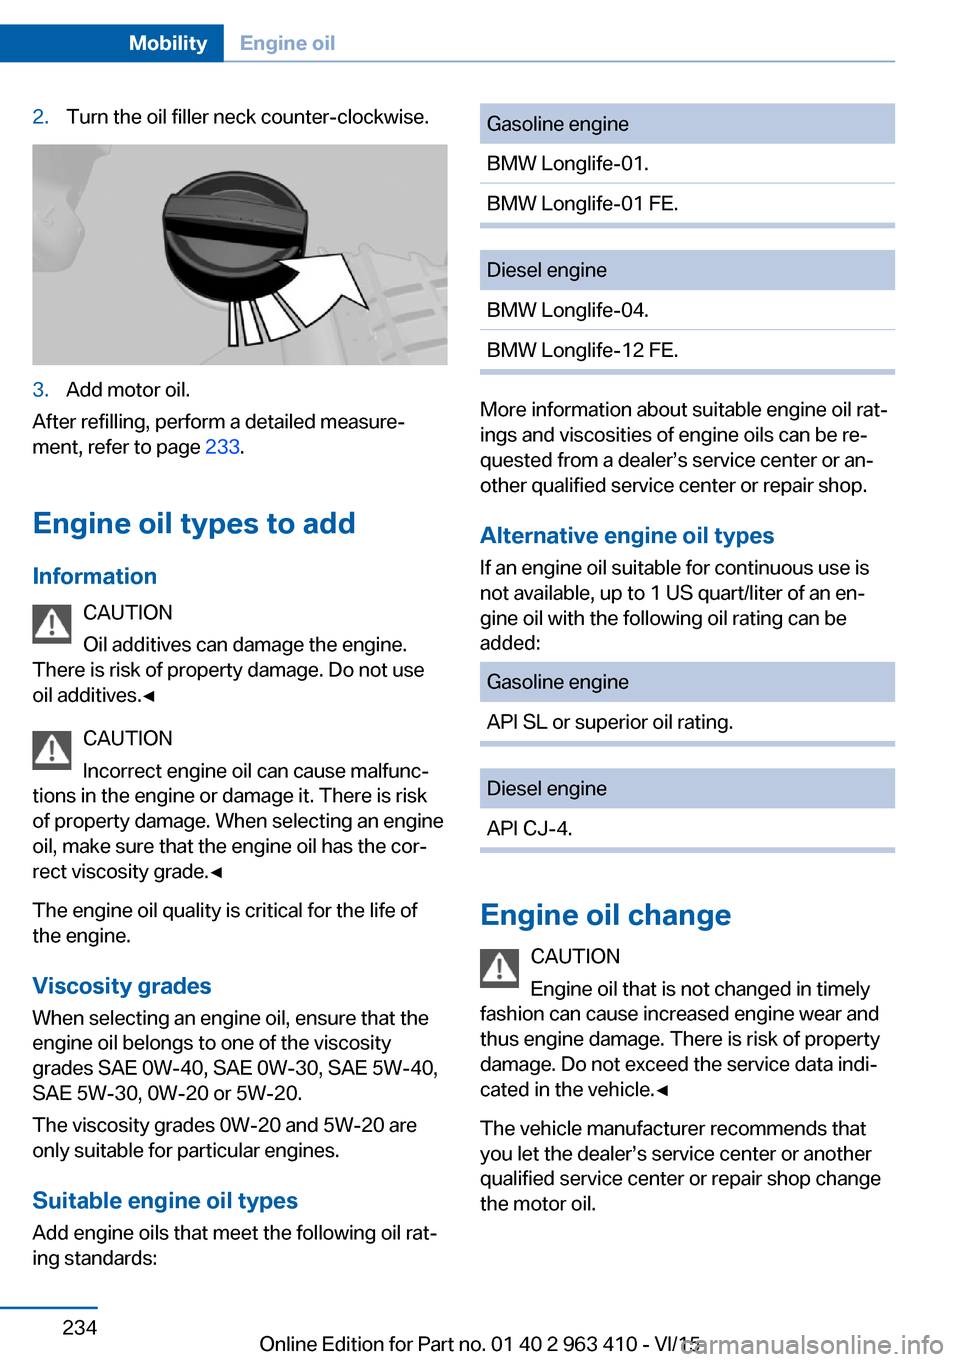 BMW X5 2015 F15 User Guide 2.Turn the oil filler neck counter-clockwise.3.Add motor oil.
After refilling, perform a detailed measure‐
ment, refer to page  233.
Engine oil types to add Information CAUTION
Oil additives can dam